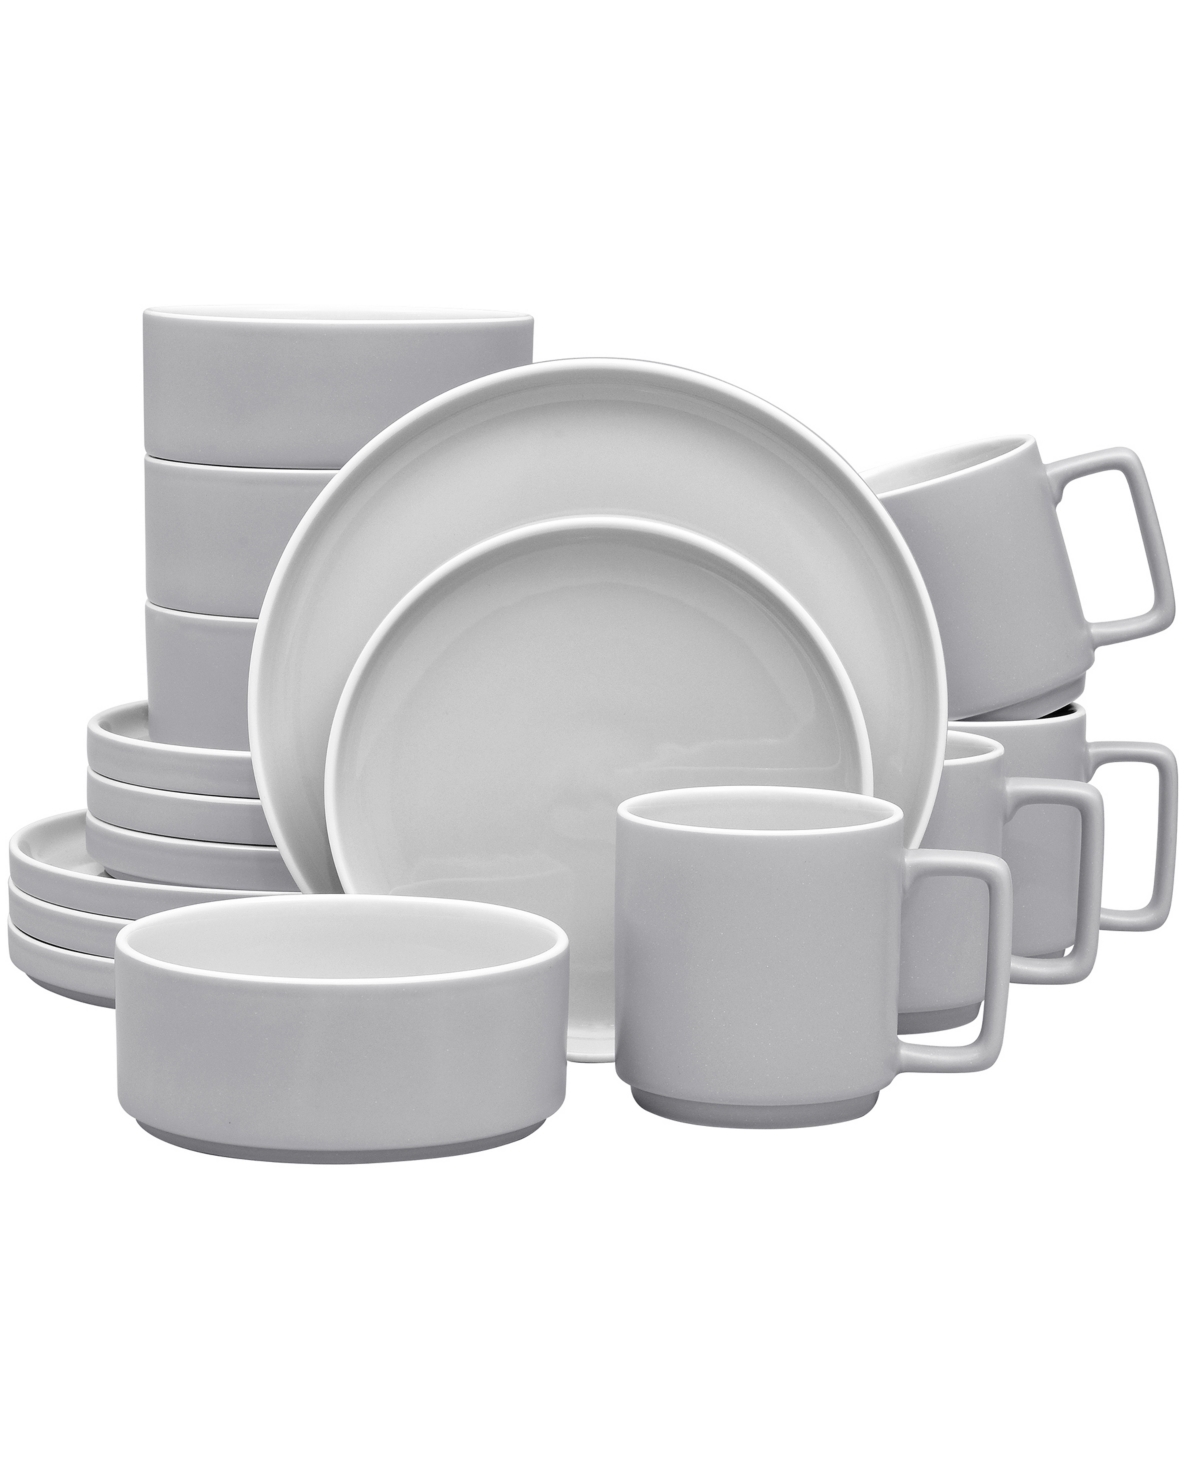 ColorTrio Stax 16 Piece Dinnerware Set, Service for 4 - Clay